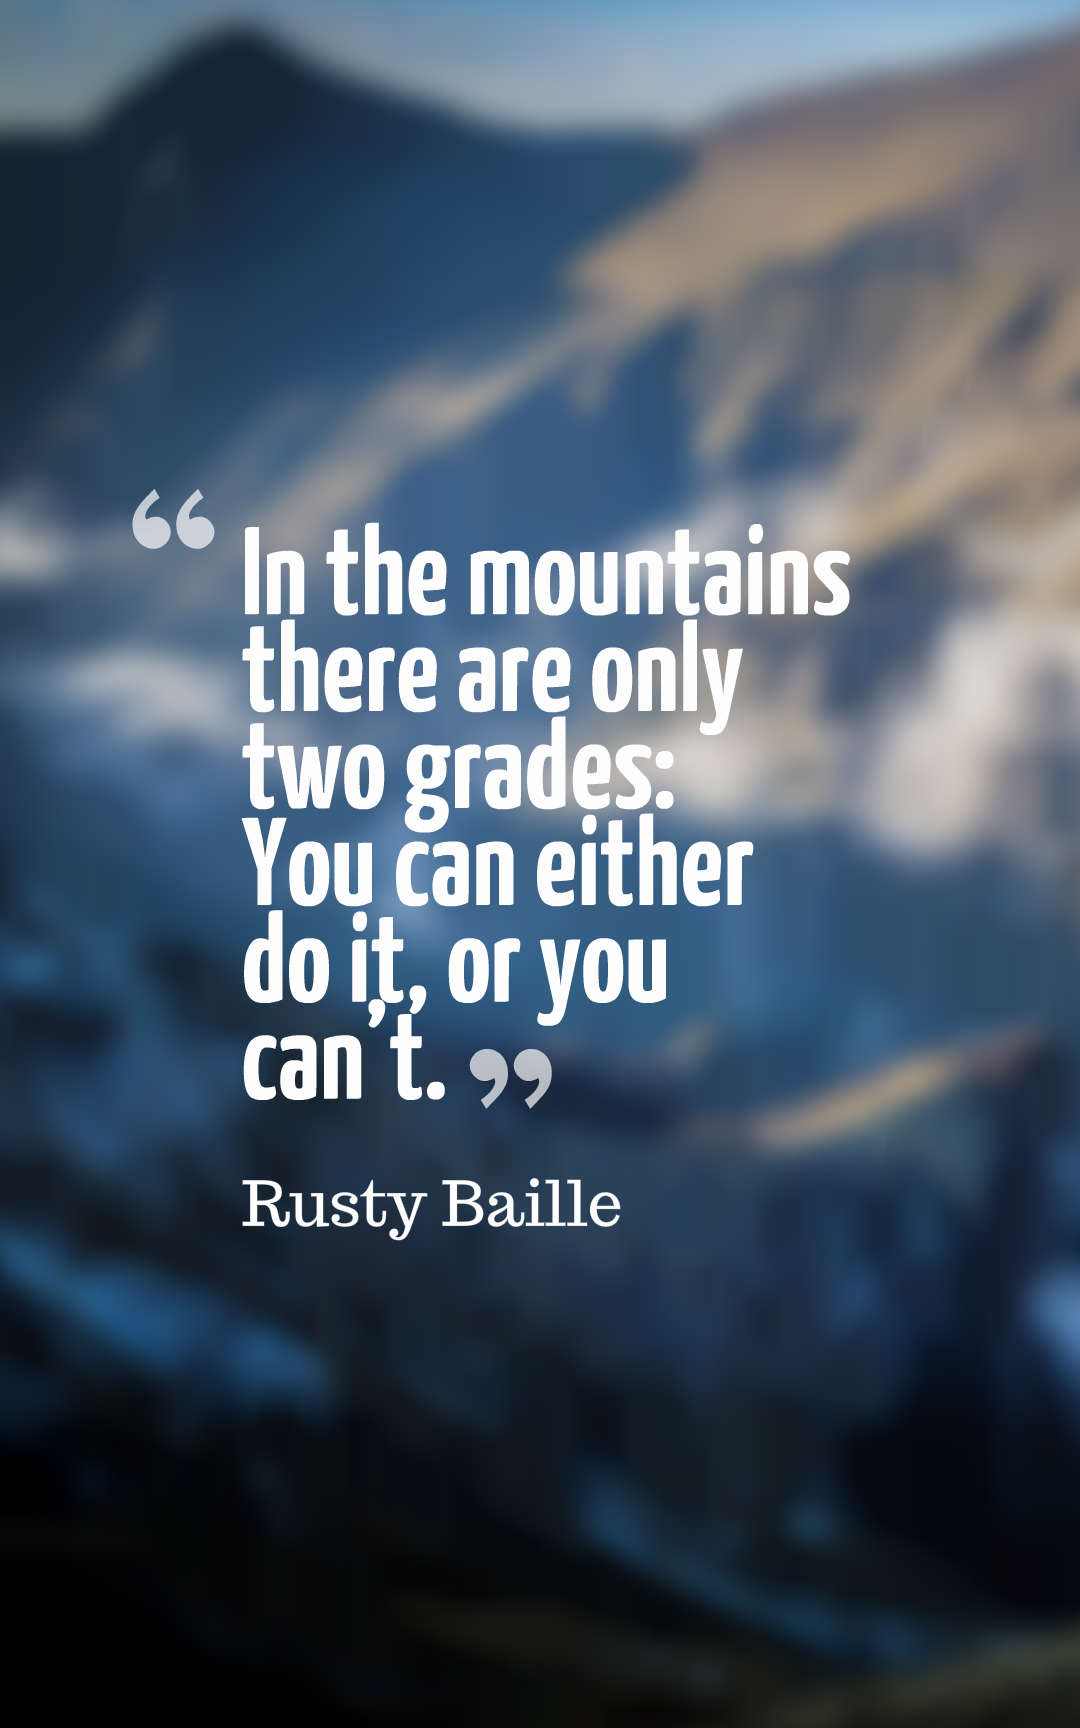 In the mountains there are only two grades You can either do it, or you can’t.